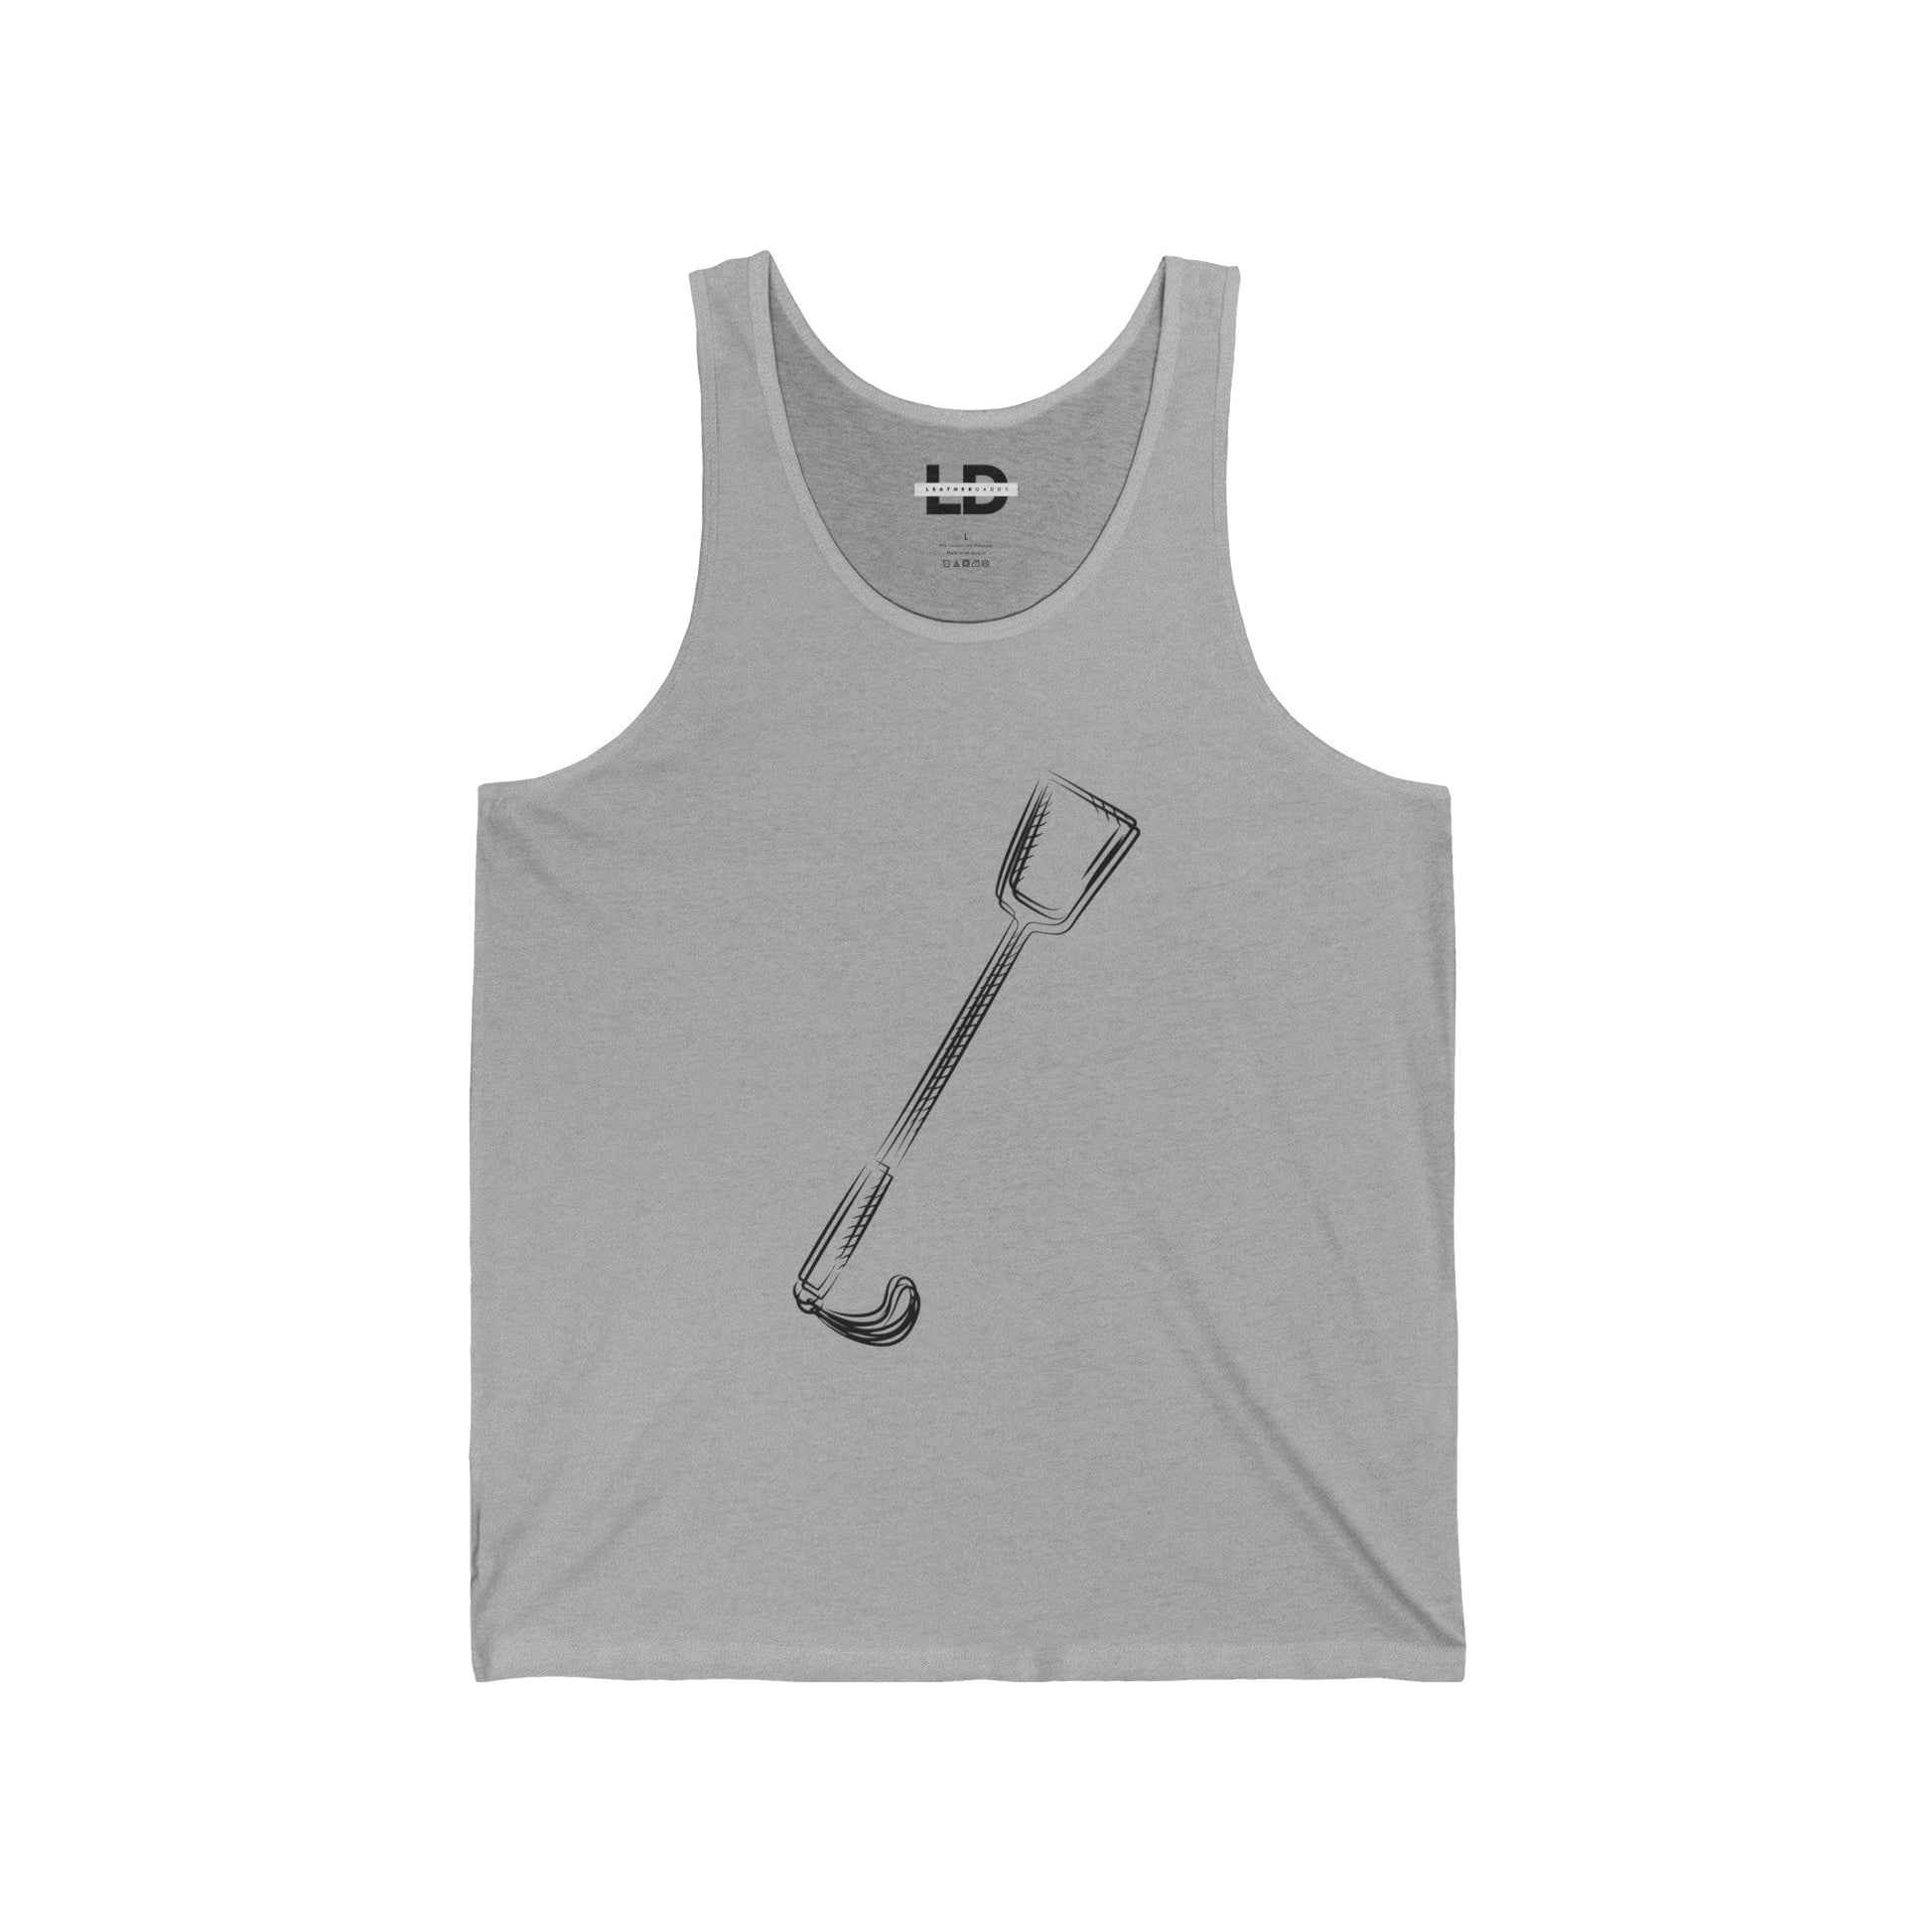 Tank Top XS / Athletic Heather Crop It Like Its Hot Tank Top - LeatherDaddy LEATHERDADDY BATOR